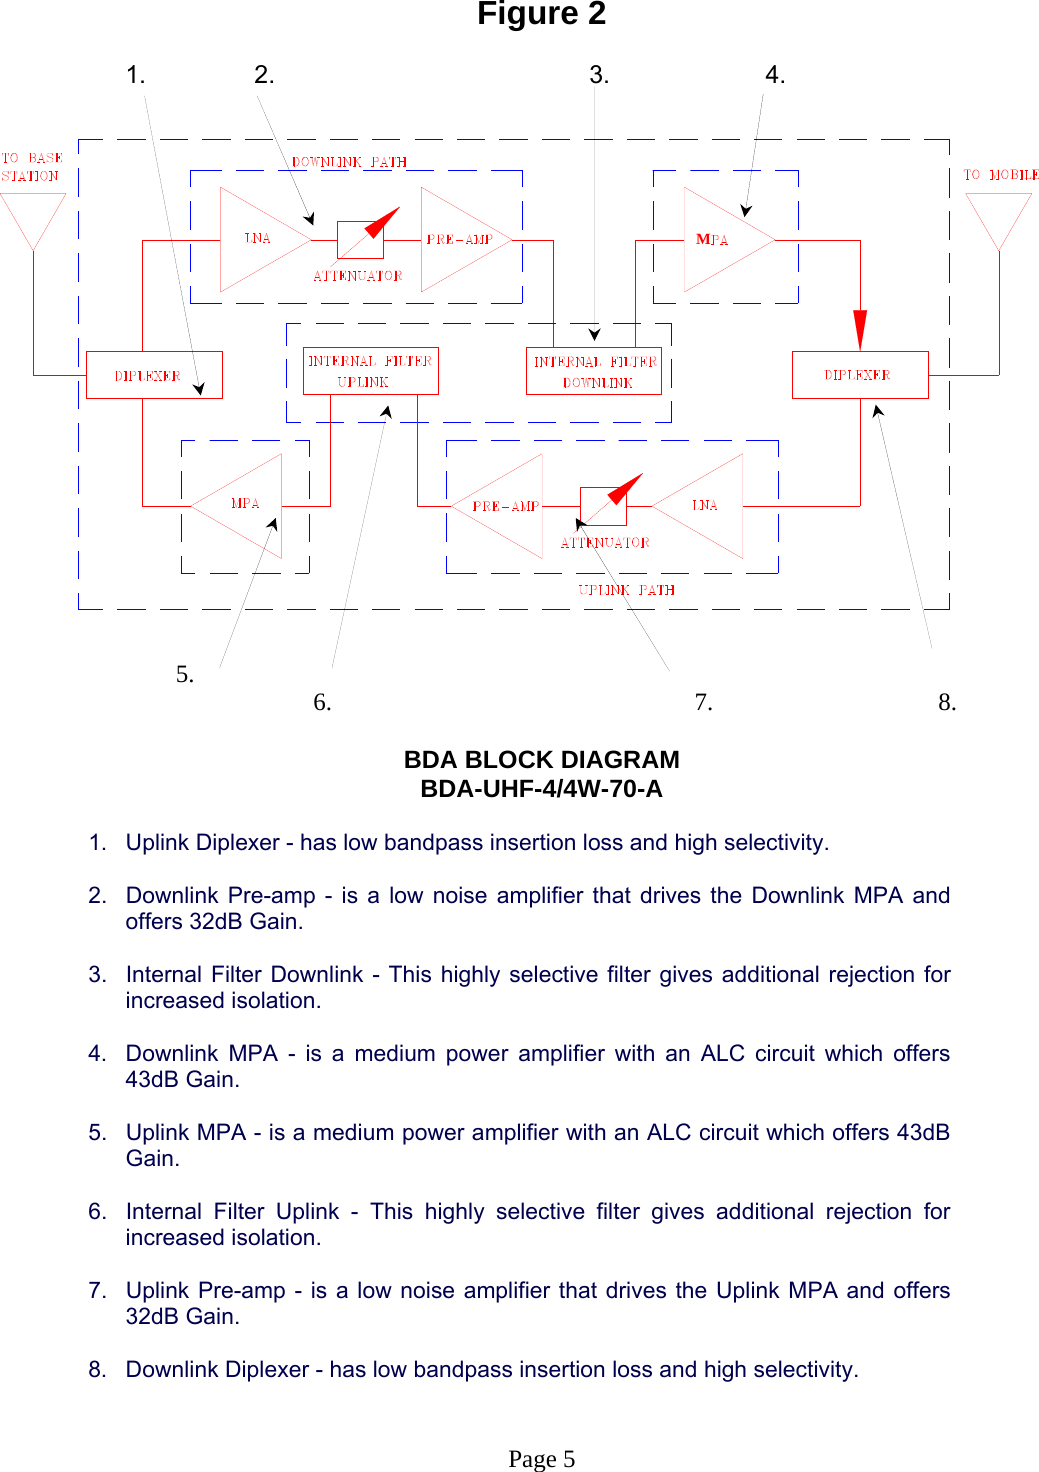 Figure 2           1.       2.                  3.       4.                    5.                             6.                            7.             8.                            MBDA BLOCK DIAGRAM BDA-UHF-4/4W-70-A  1.  Uplink Diplexer - has low bandpass insertion loss and high selectivity.  2.  Downlink Pre-amp - is a low noise amplifier that drives the Downlink MPA and offers 32dB Gain.  3.  Internal Filter Downlink - This highly selective filter gives additional rejection for increased isolation.  4.  Downlink MPA - is a medium power amplifier with an ALC circuit which offers 43dB Gain.  5.  Uplink MPA - is a medium power amplifier with an ALC circuit which offers 43dB Gain.  6.  Internal Filter Uplink - This highly selective filter gives additional rejection for increased isolation.  7.  Uplink Pre-amp - is a low noise amplifier that drives the Uplink MPA and offers 32dB Gain.  8.  Downlink Diplexer - has low bandpass insertion loss and high selectivity.   Page 5 